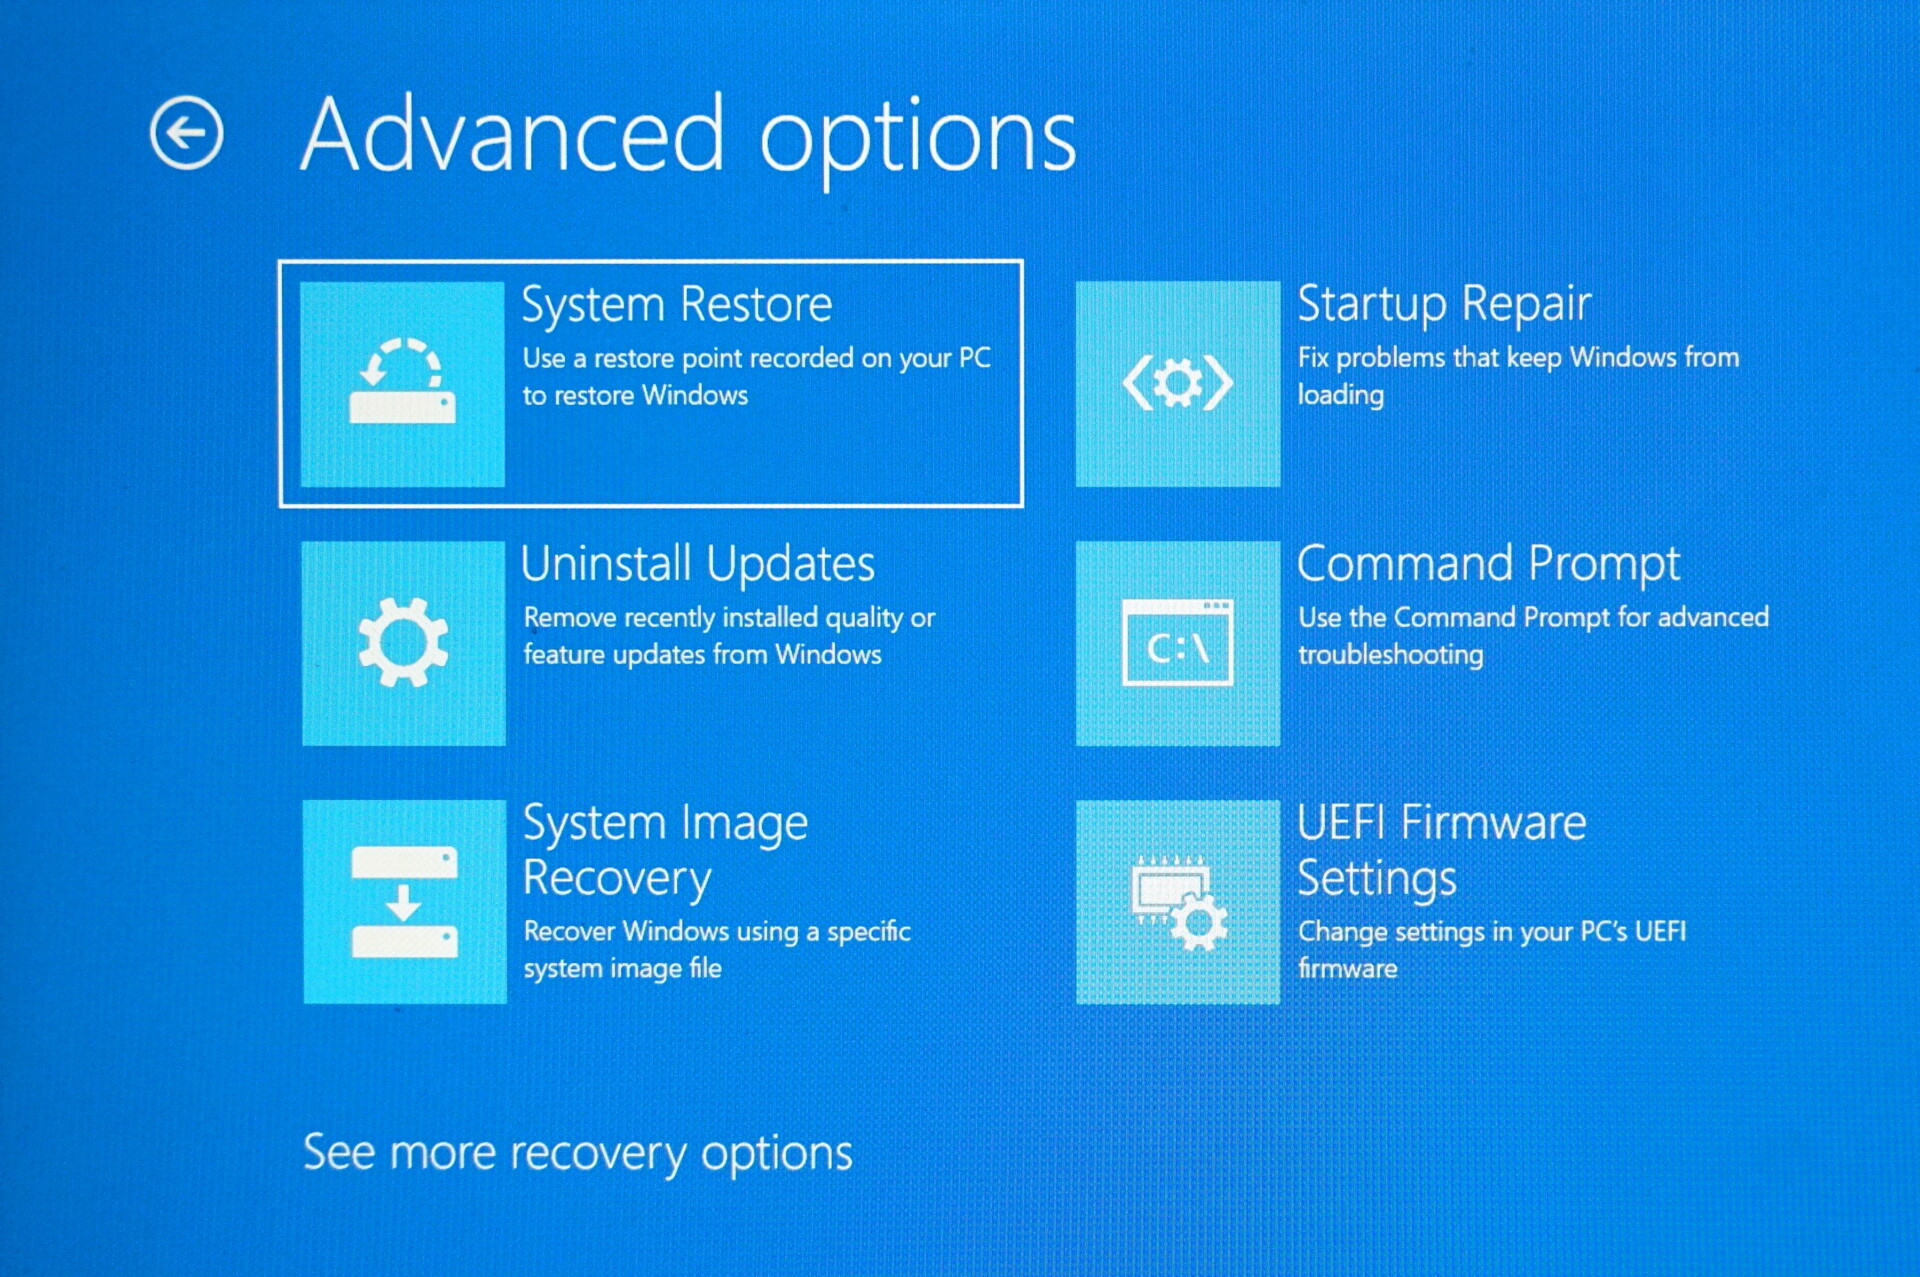 Windows 10 advanced options - how to do a System Restore on Windows 10